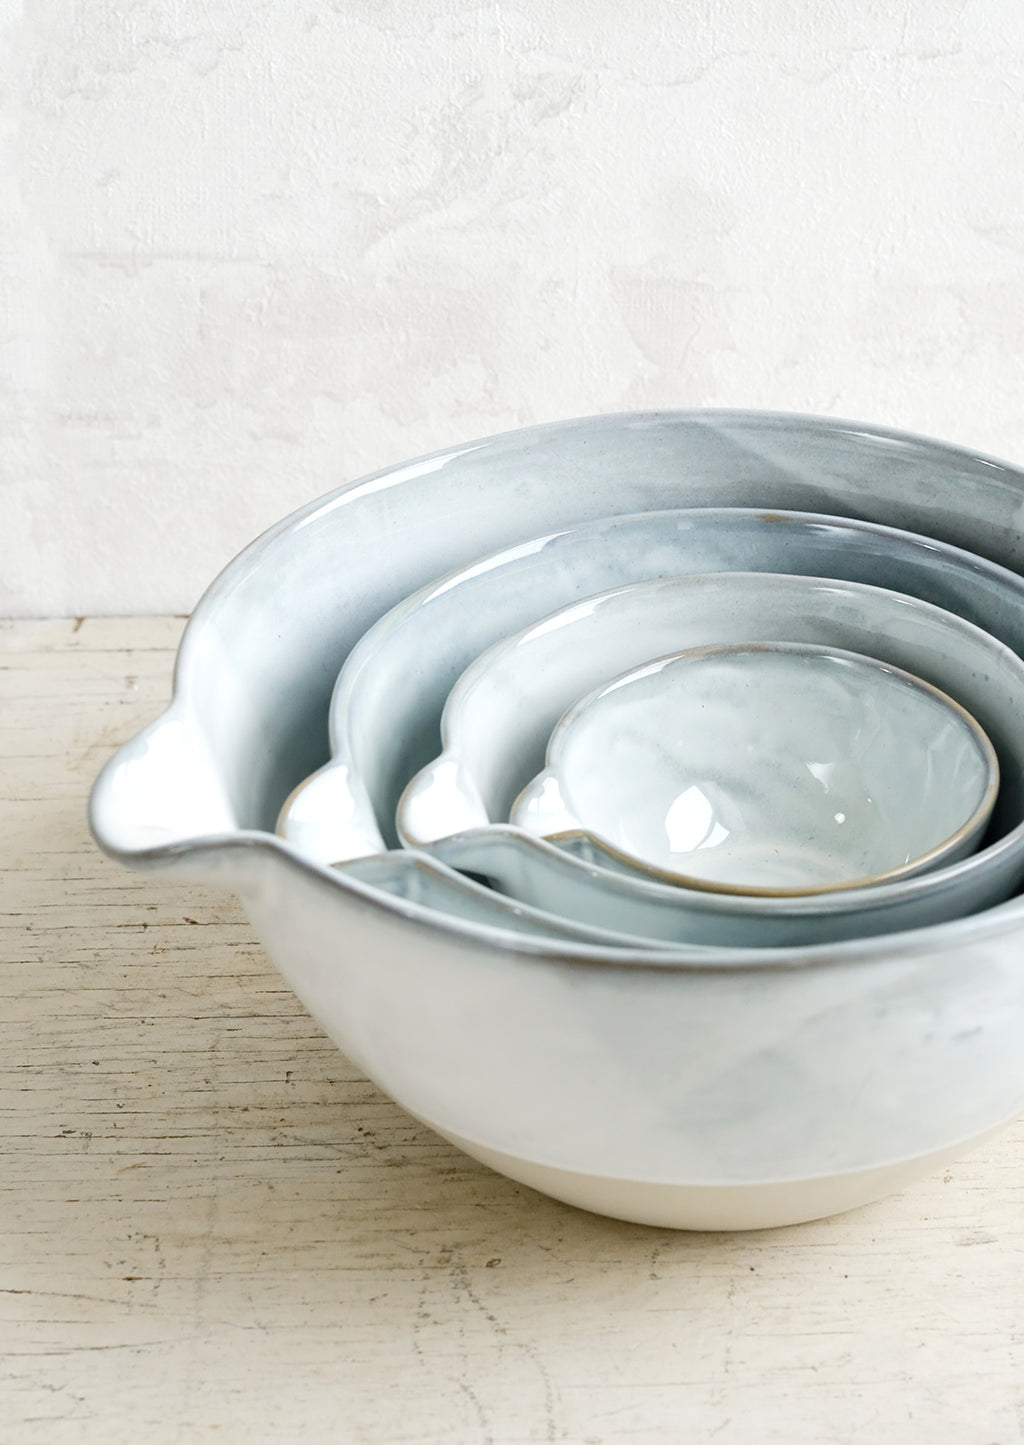 2: Four nesting ceramic bowls with pouring spouts.